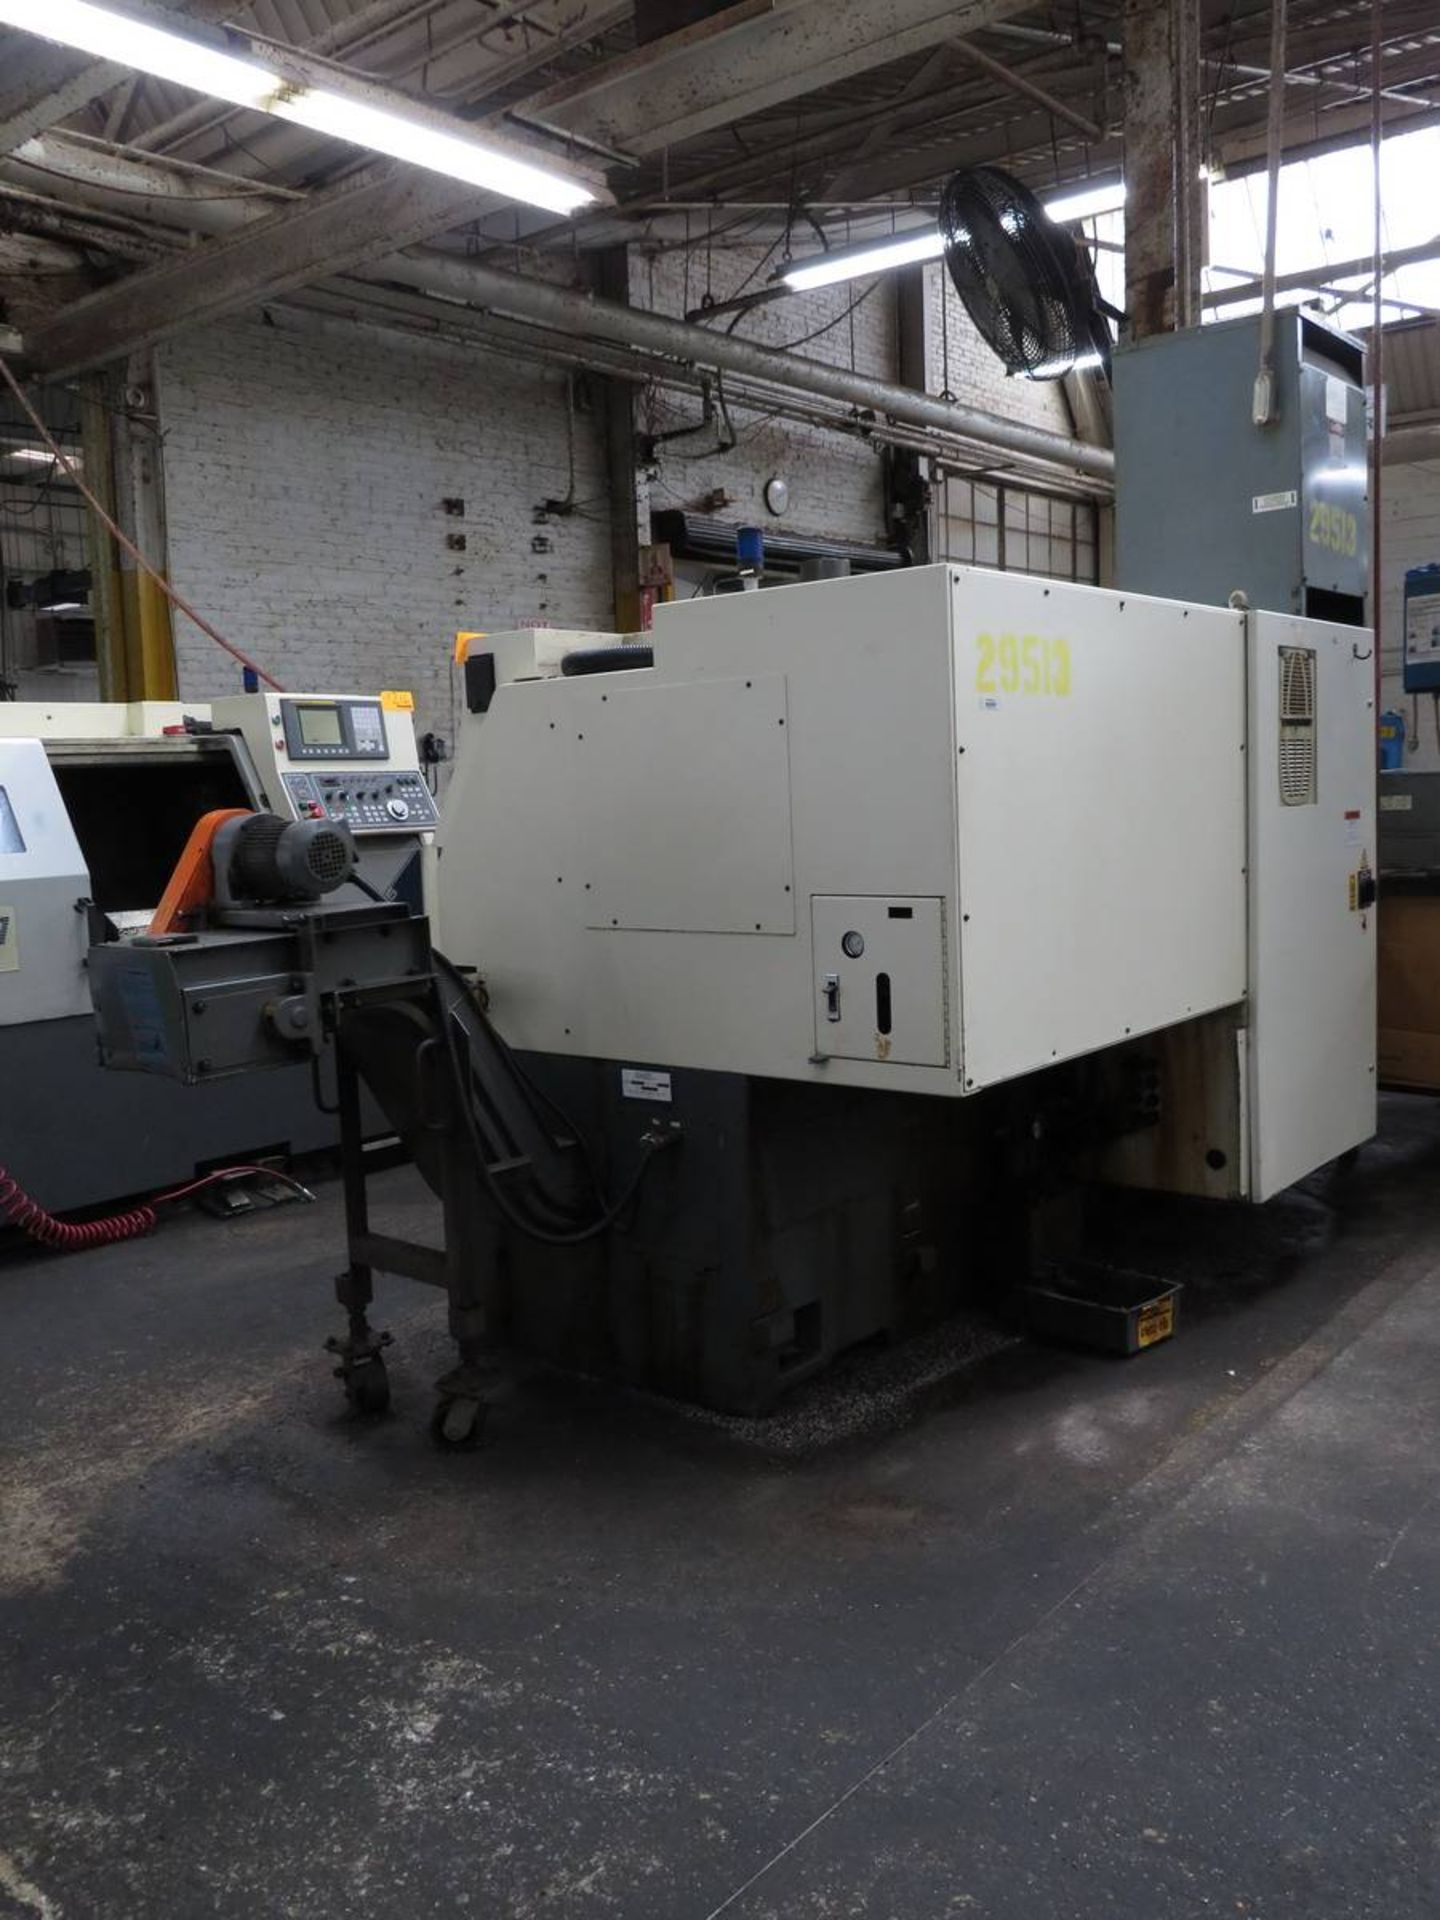 2007 Femco HL-25 2 Axis Dual Spindle CNC Turning Center - Image 3 of 9